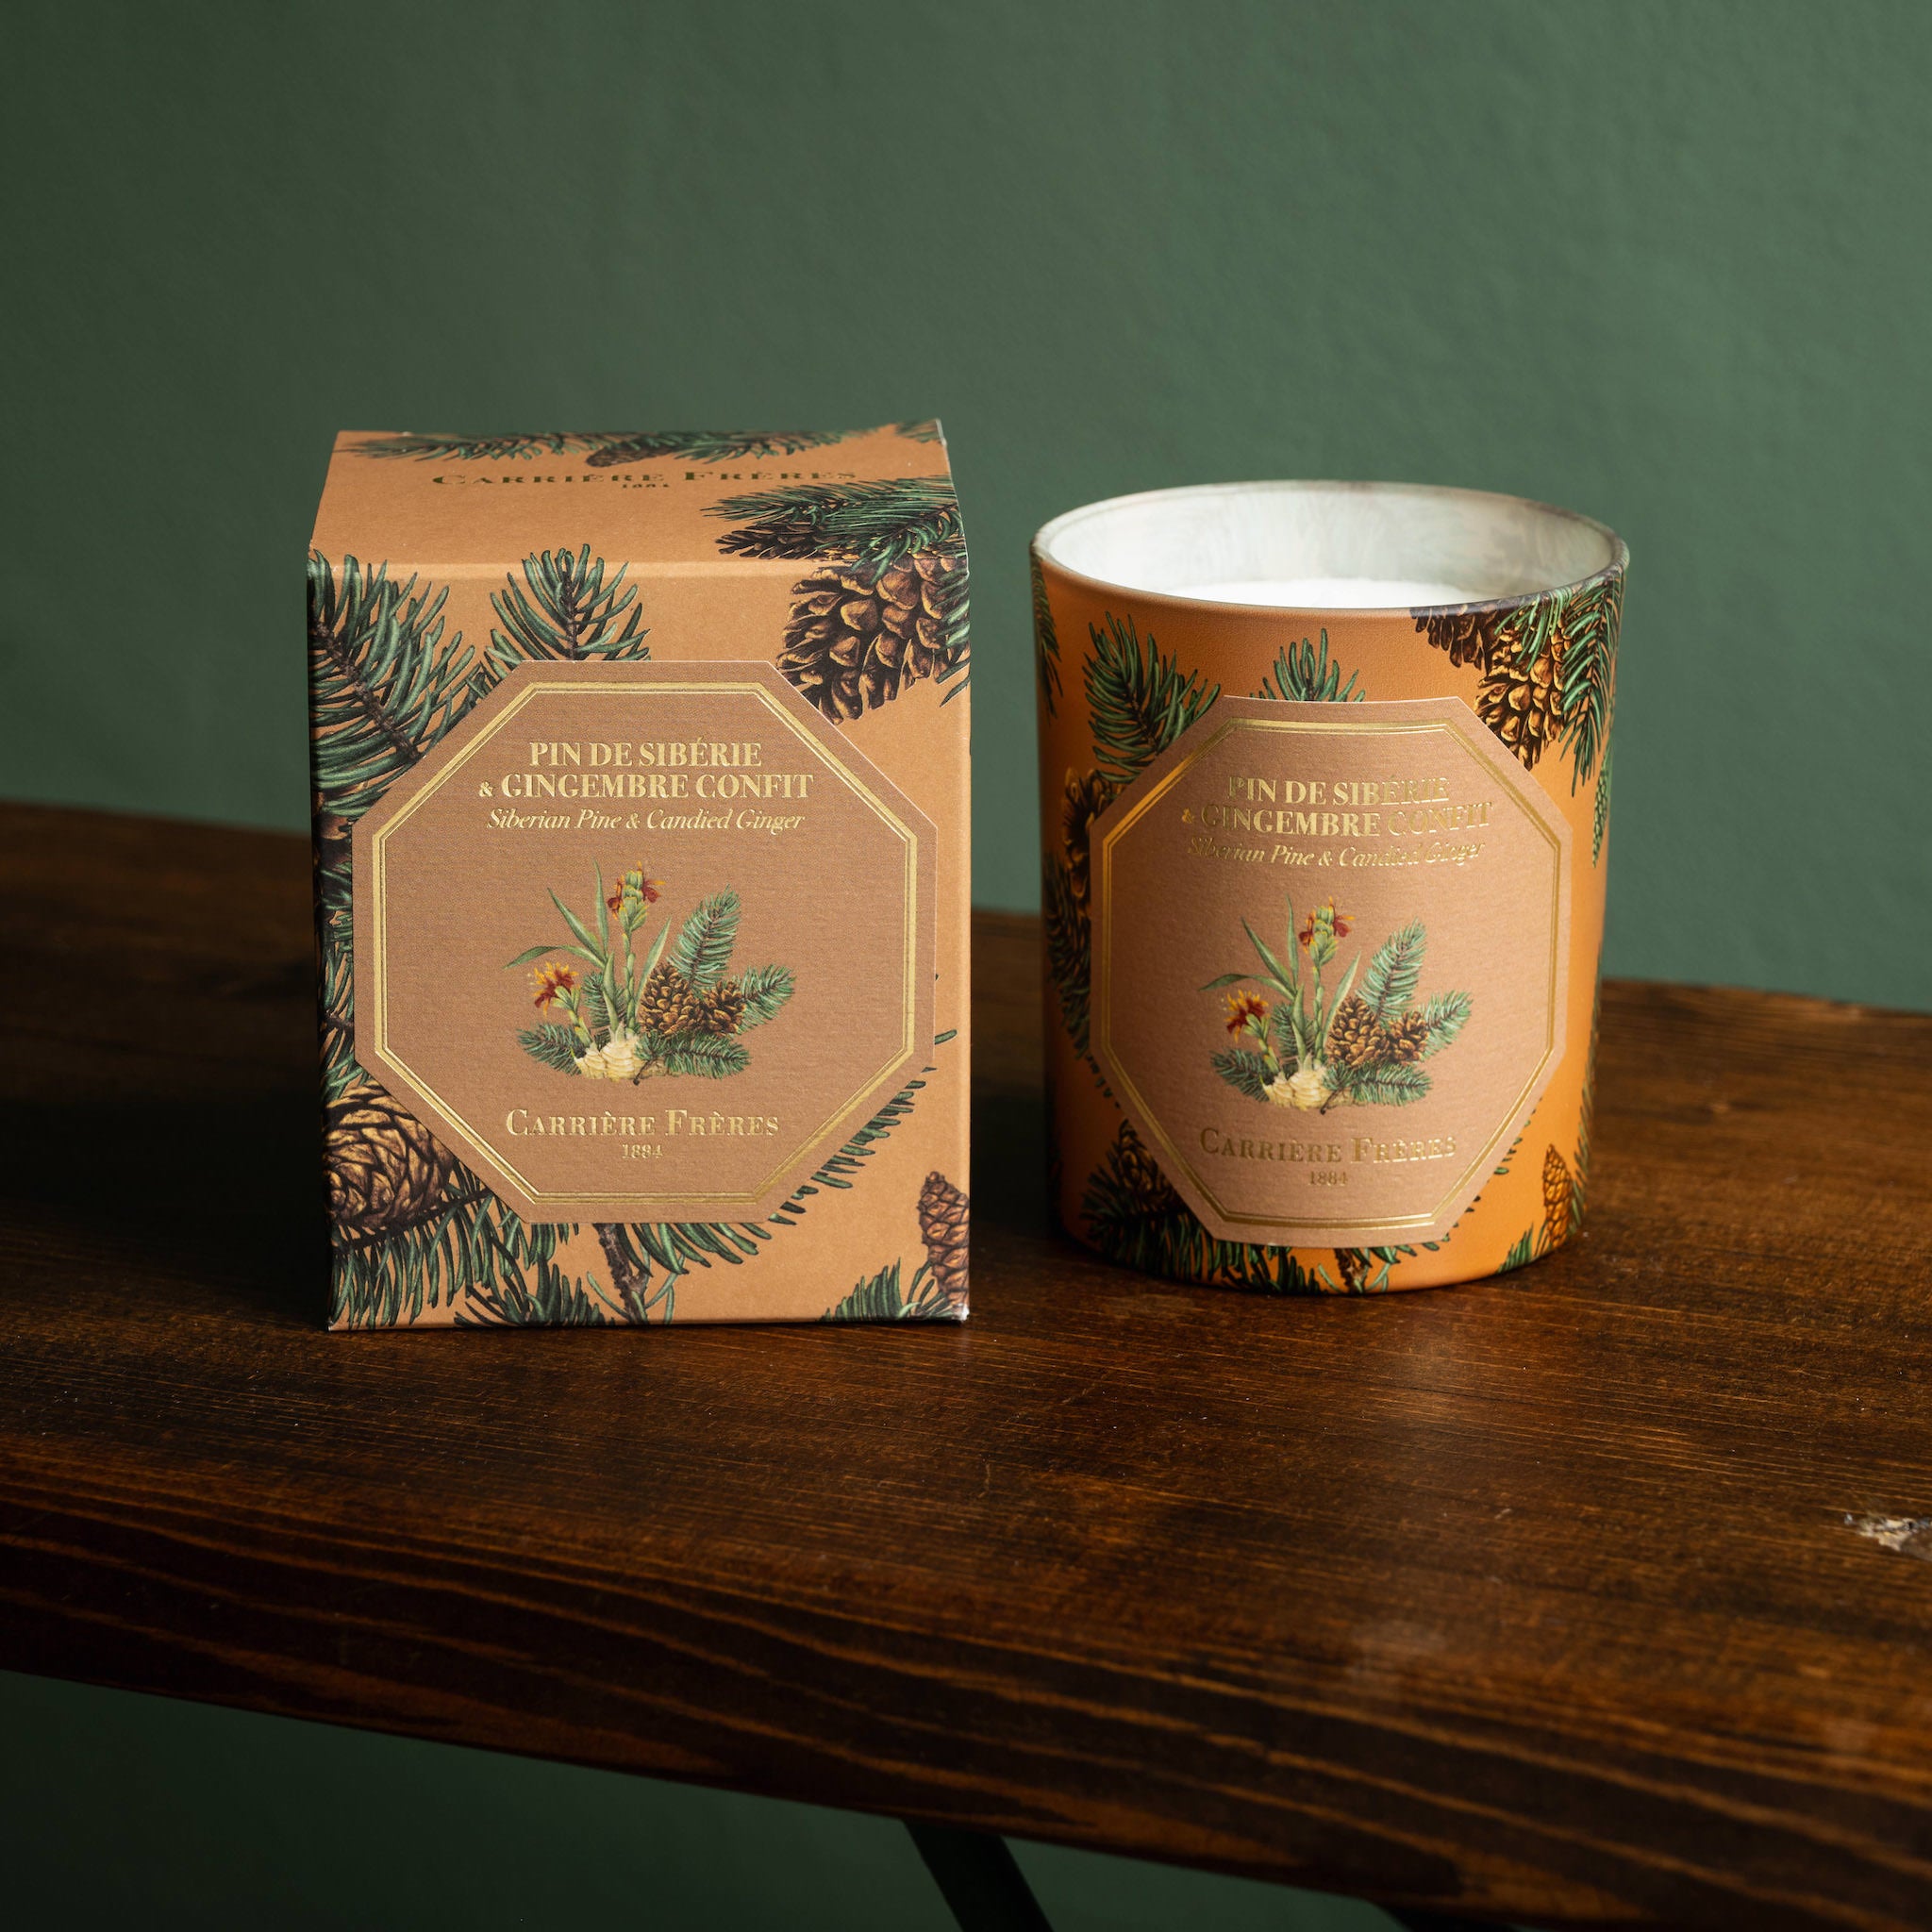 Carriere Freres Siberian Pine & Candied Ginger Candle & box